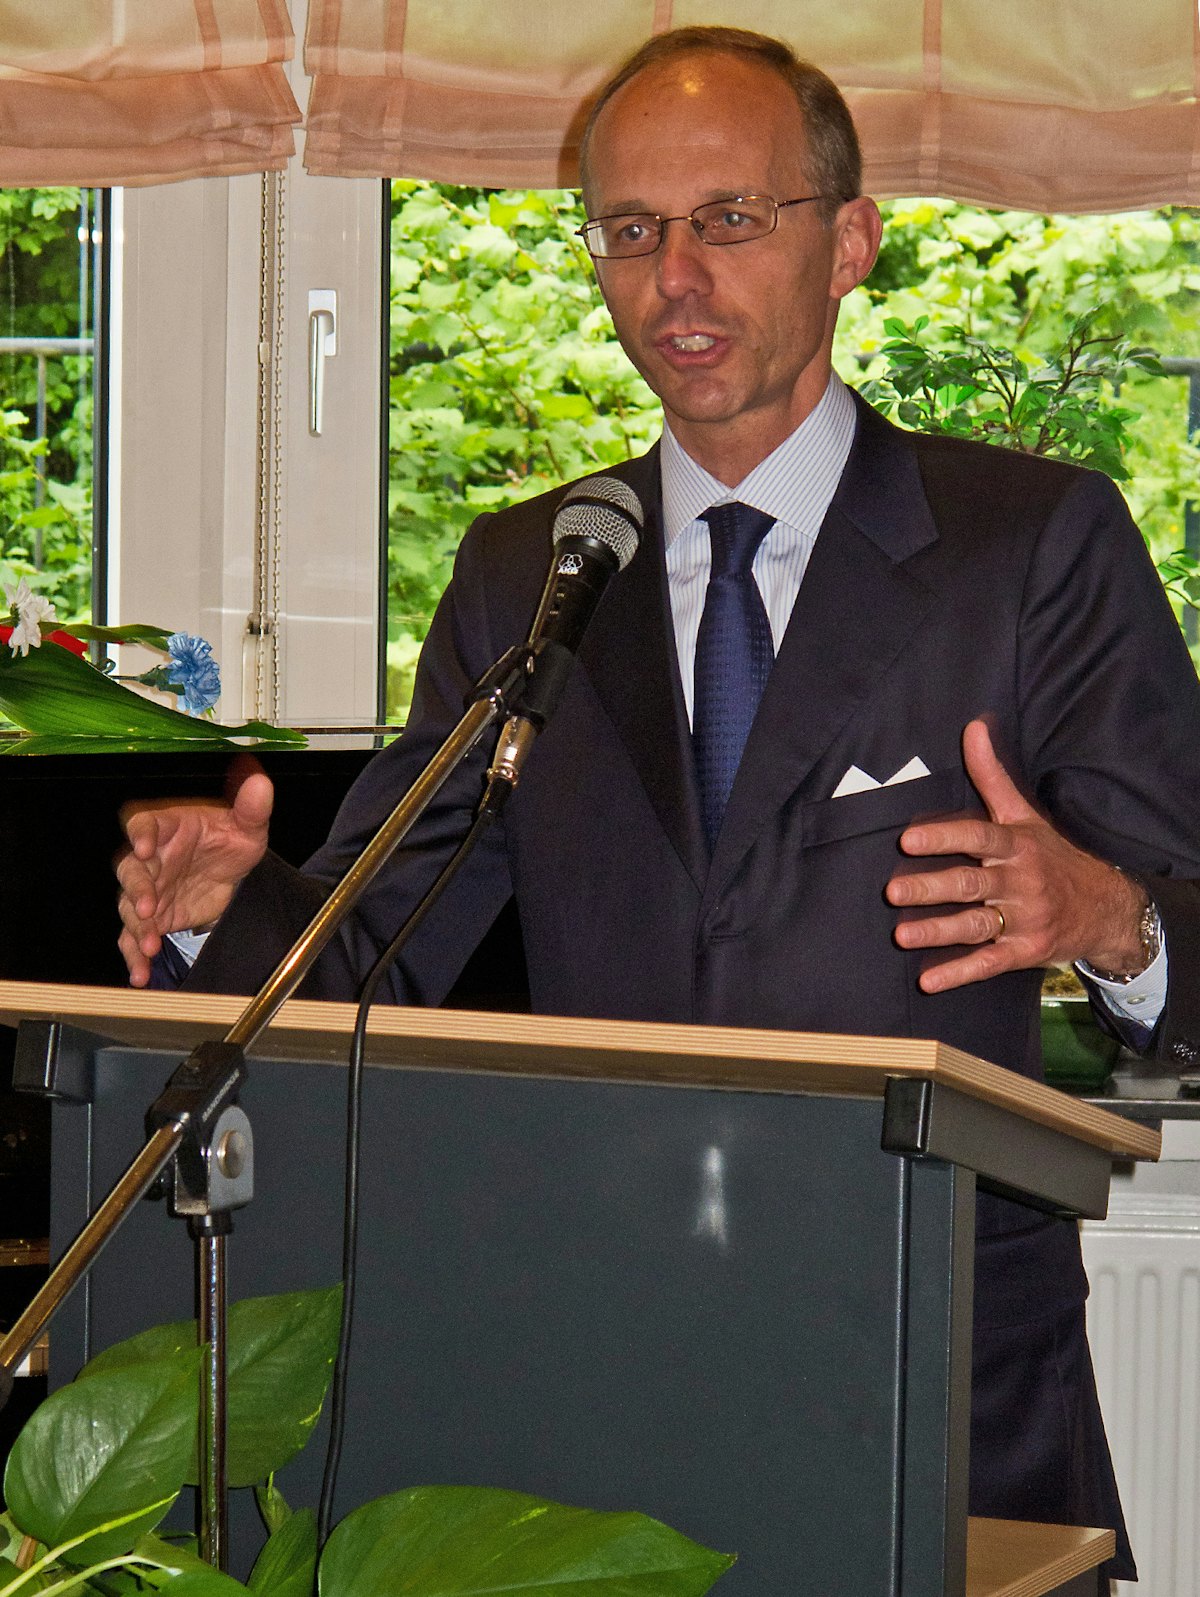 Luxembourg's Minister of Finance, Luc Frieden, addressing a celebration marking National Day at the Baha'i Centre in Luxembourg City.